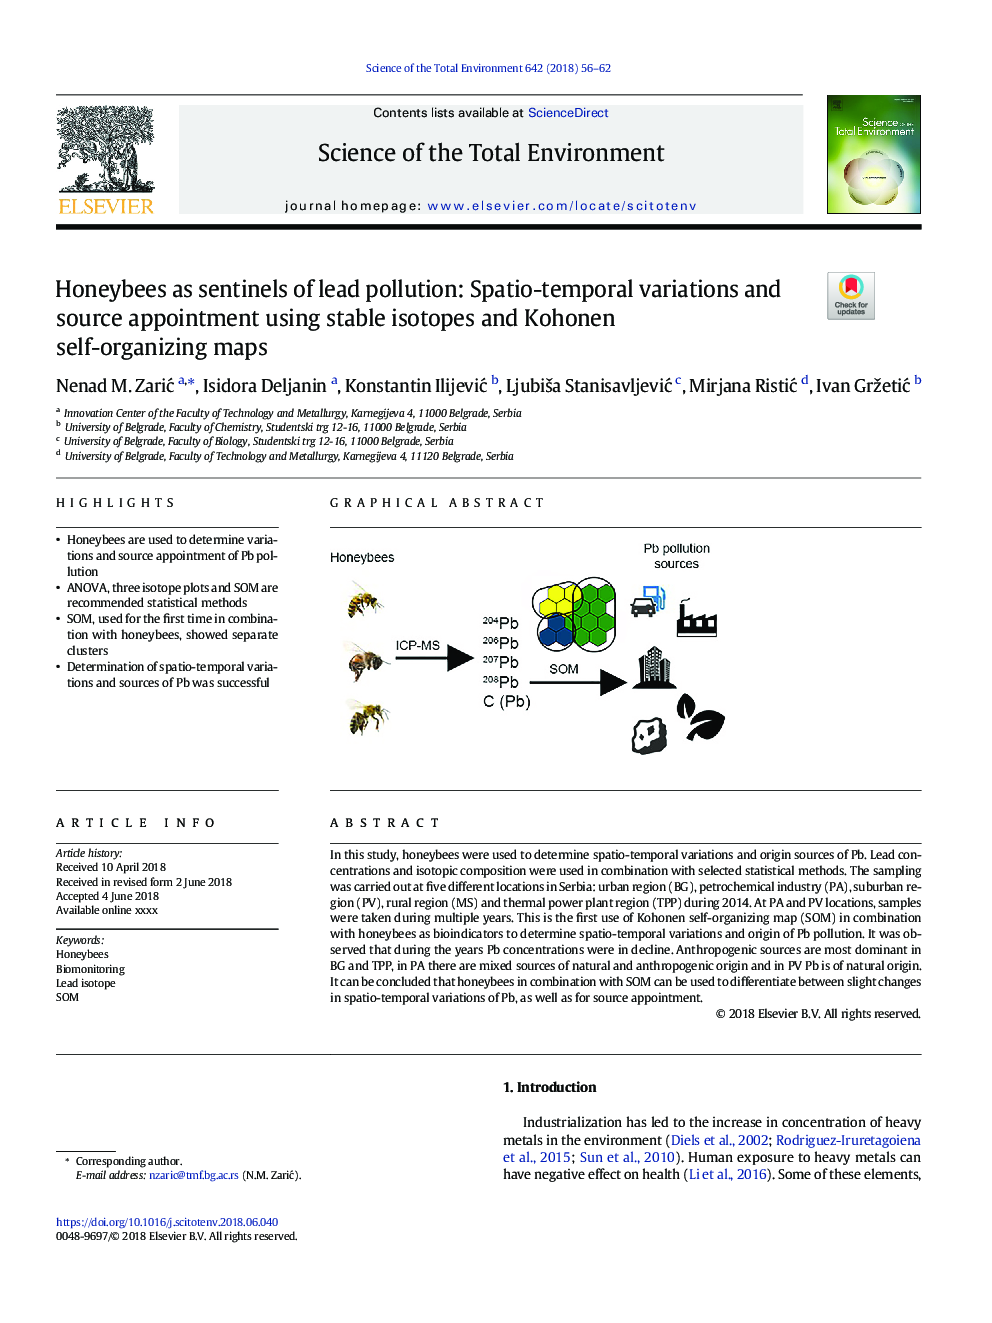 Honeybees as sentinels of lead pollution: Spatio-temporal variations and source appointment using stable isotopes and Kohonen self-organizing maps